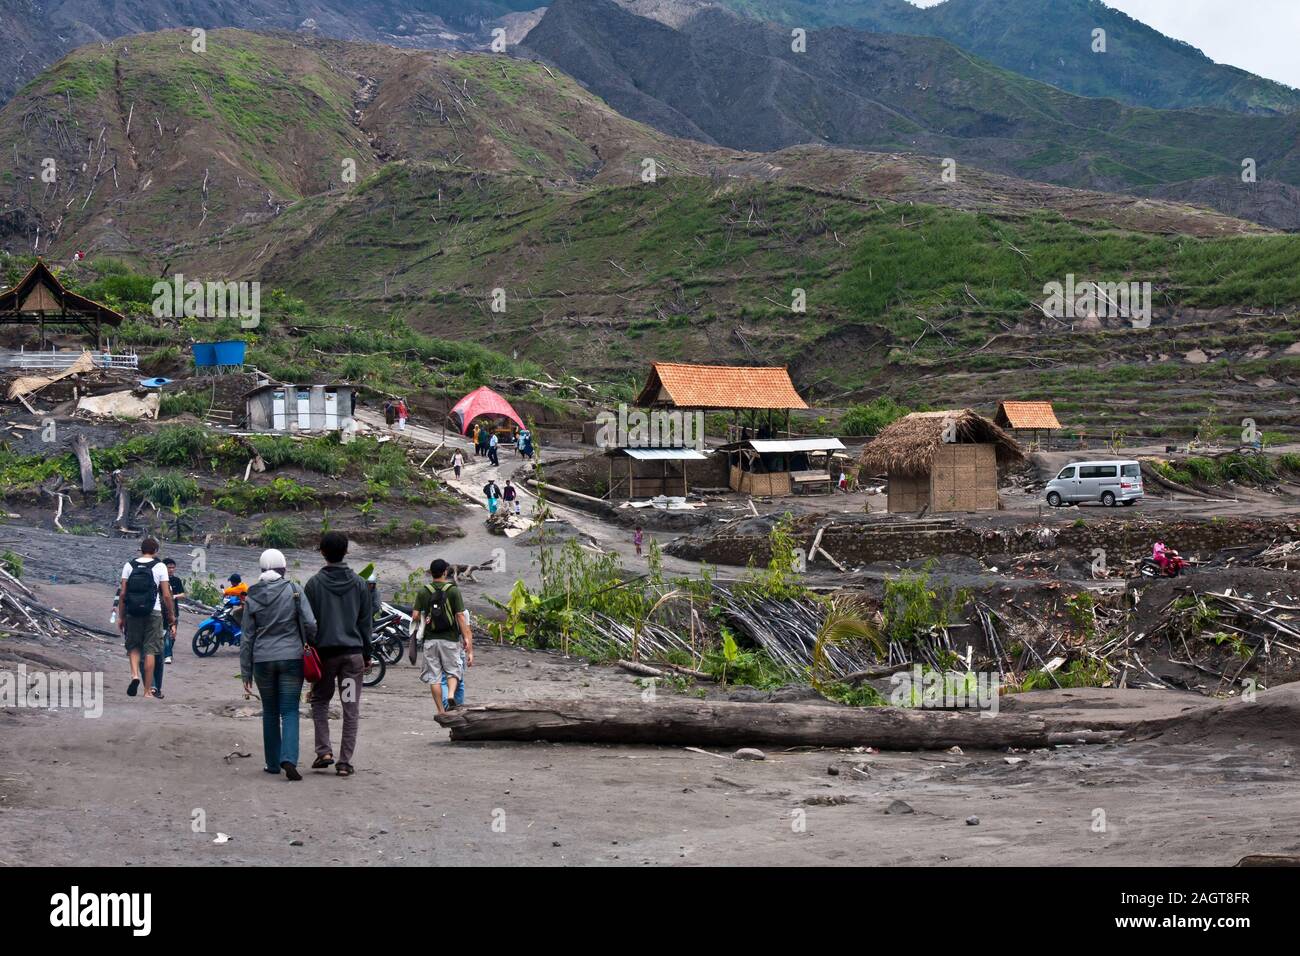 A village on the slope of Mount Merapi, Indonesia Stock Photo